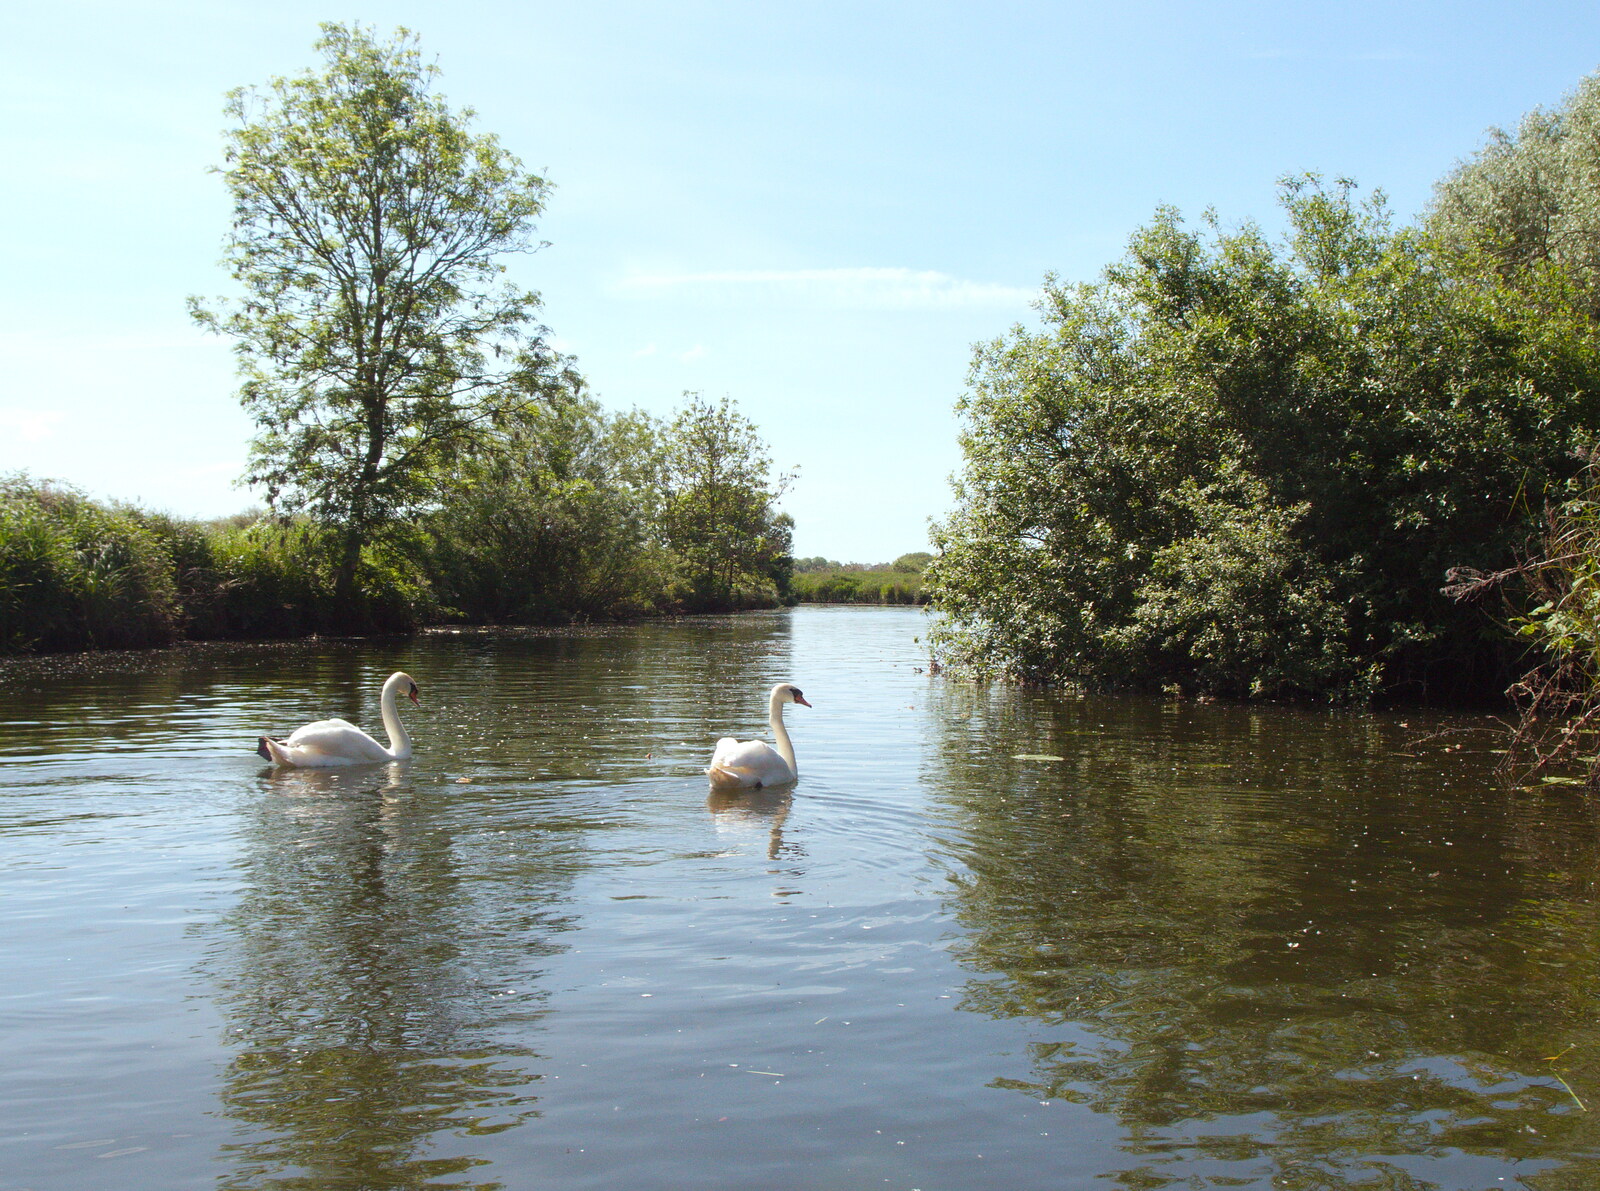 A couple of swans float about from Camping at Three Rivers, Geldeston, Norfolk - 1st June 2019